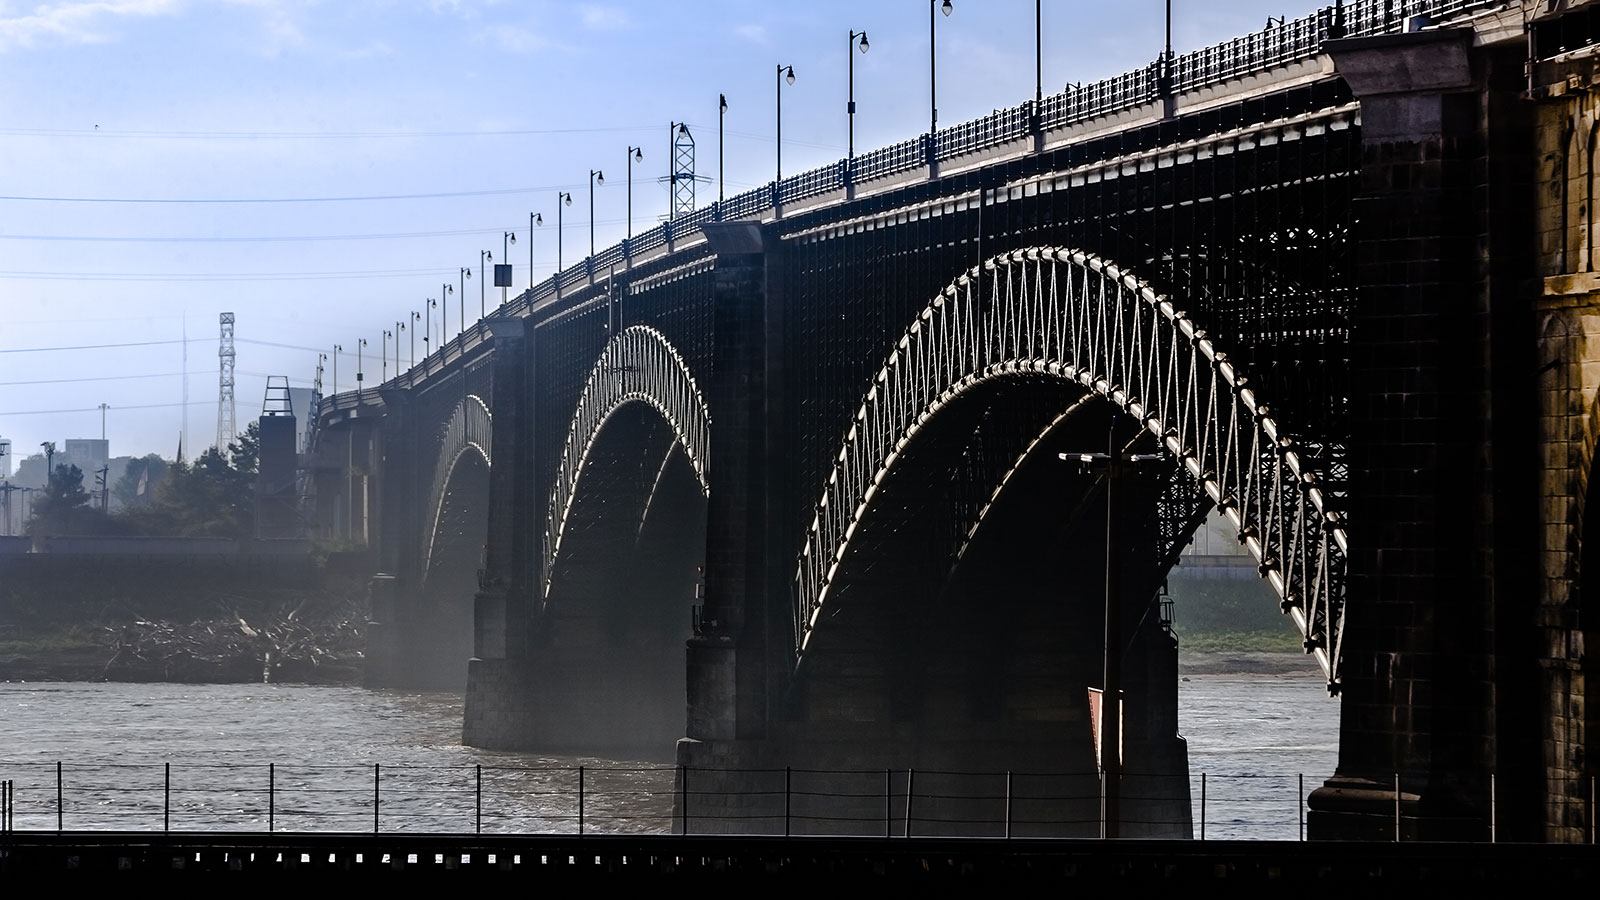 The Eads Bridge, an arch bridge over the Mississippi River connecting St. Louis, Missouri, and East St. Louis, Illinois, 2017